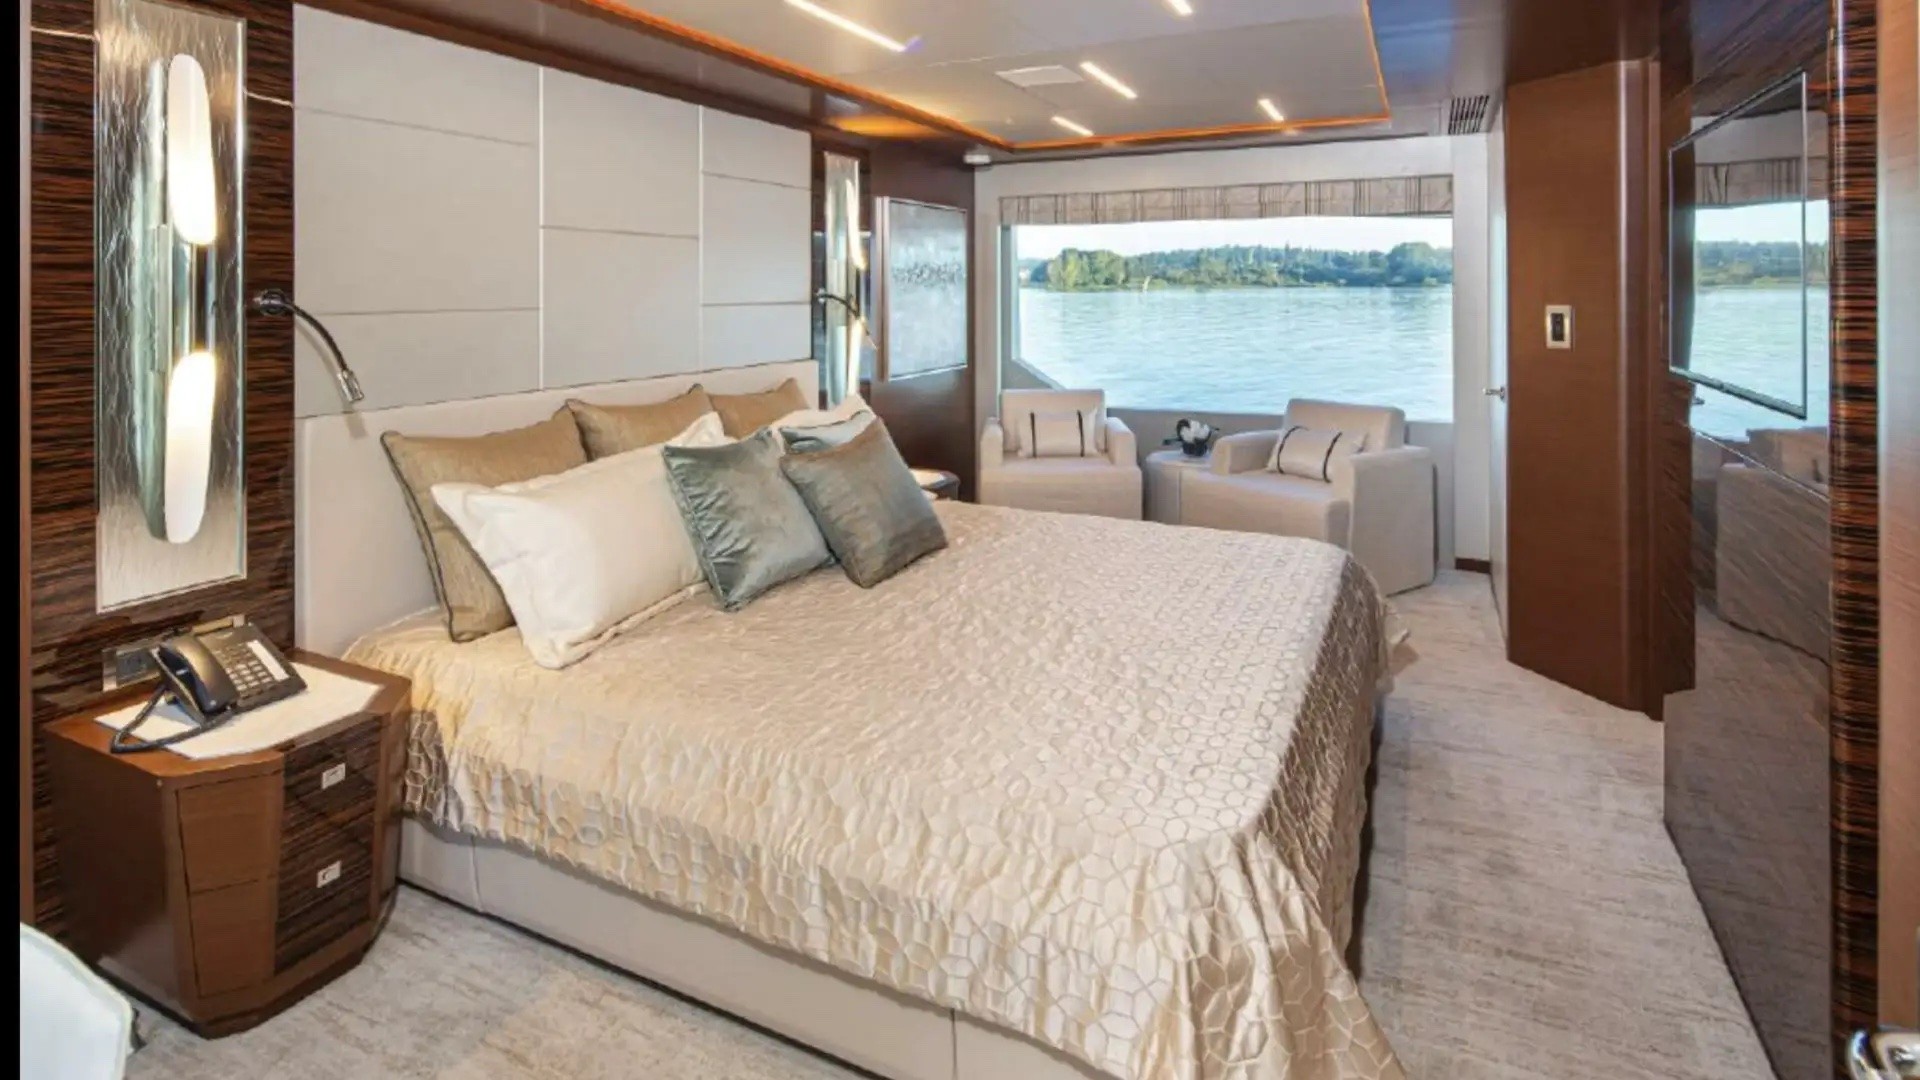 the golden standard for comfort and peace can be found in the 8 million tlc yacht 10